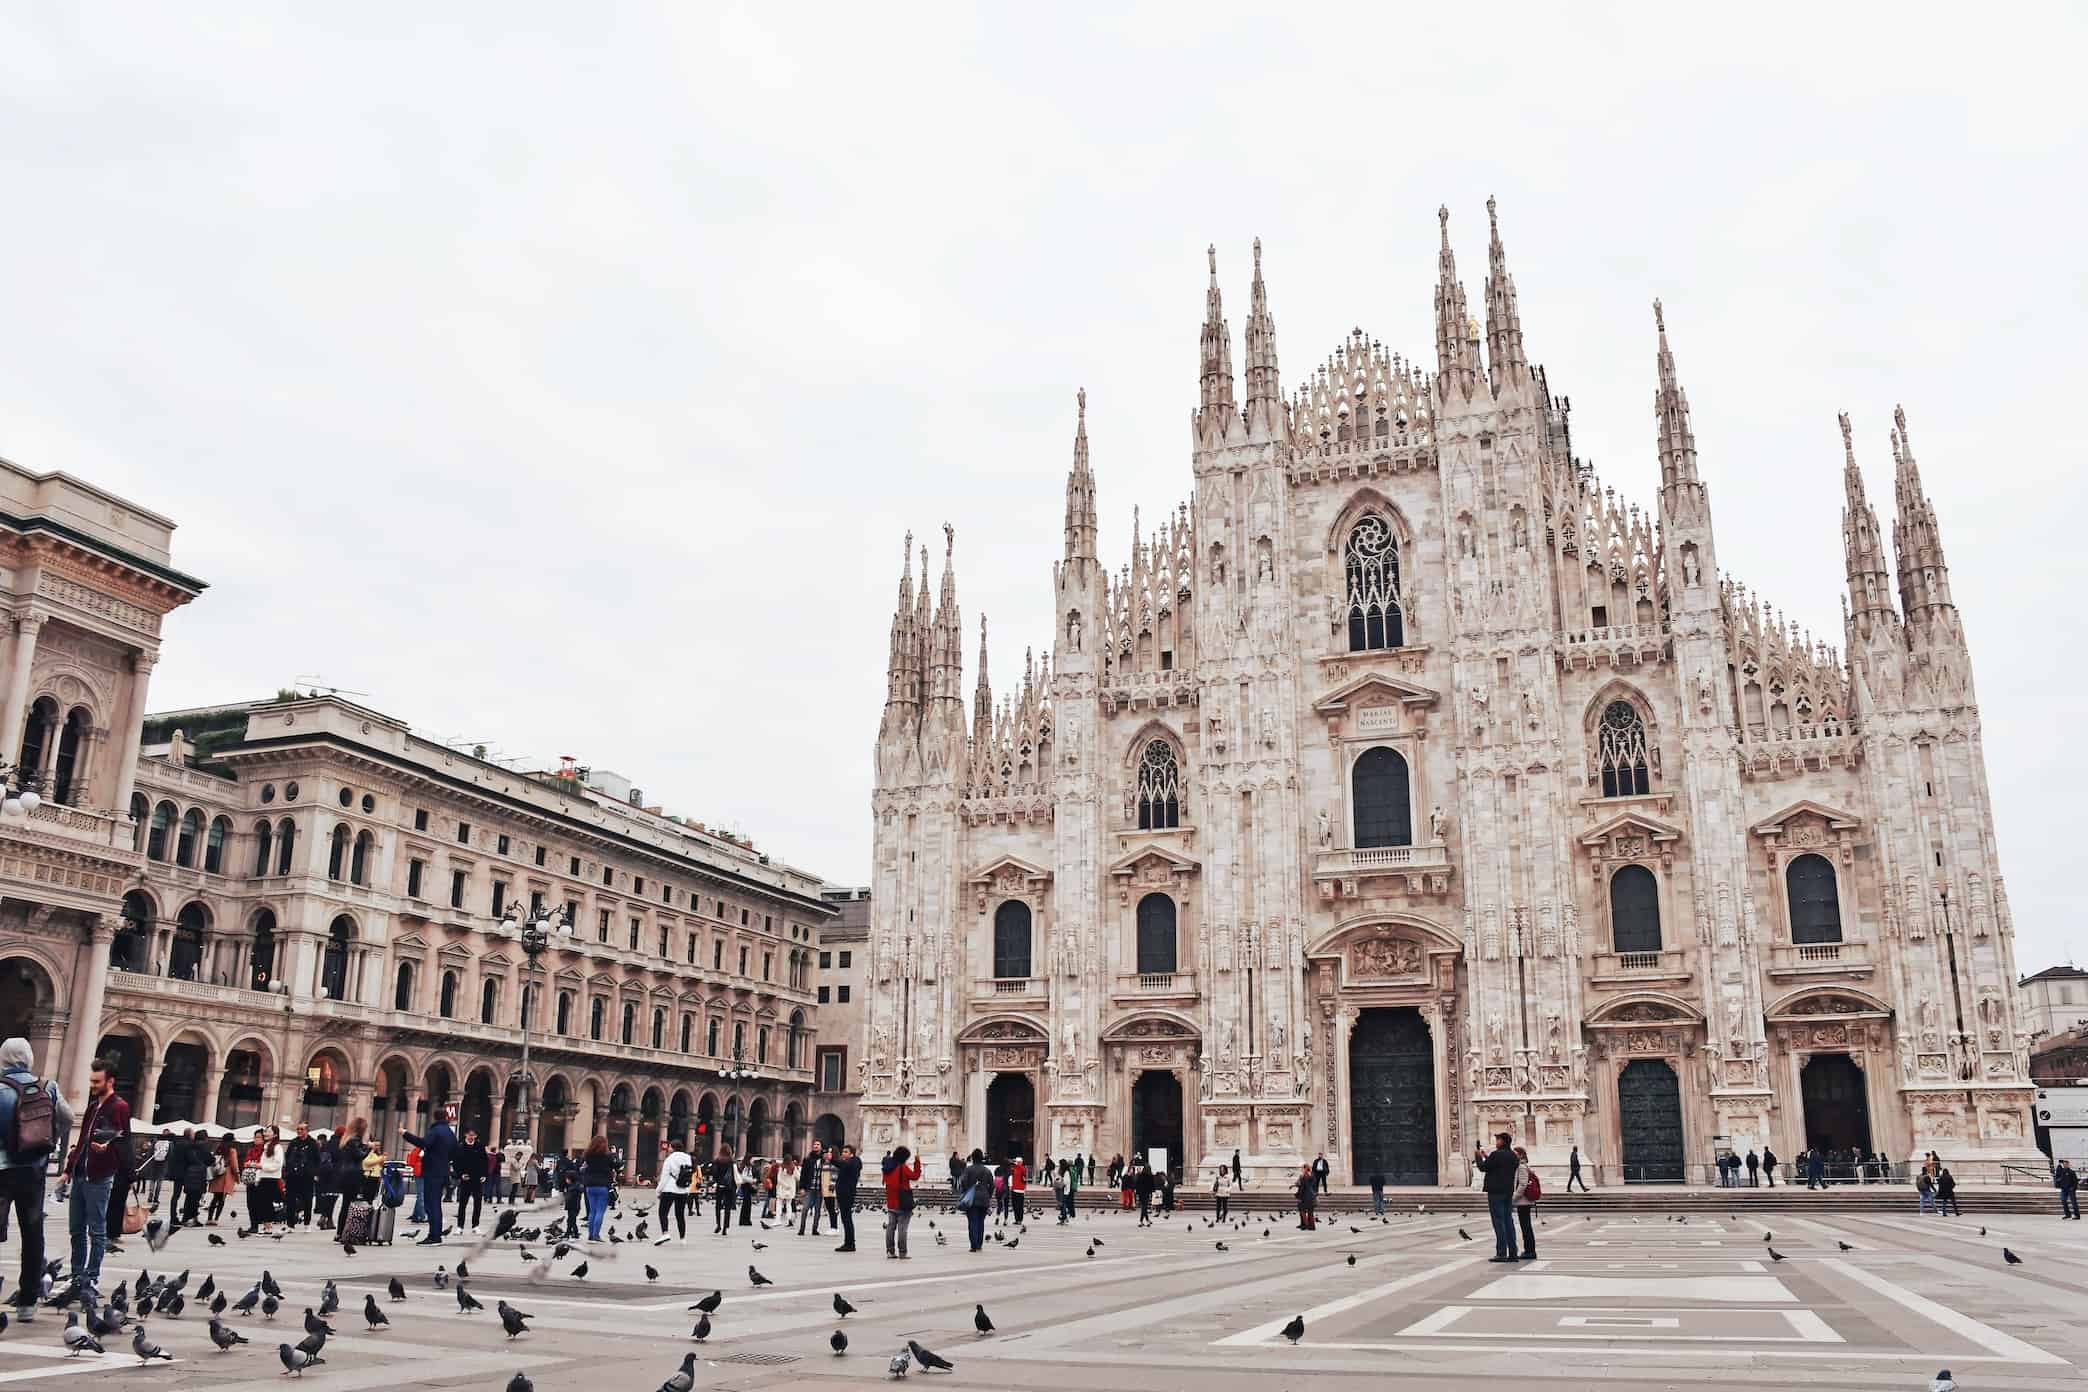 Milan cathedral (duomo di milano) with tourists and pigeons in the piazza del duomo.